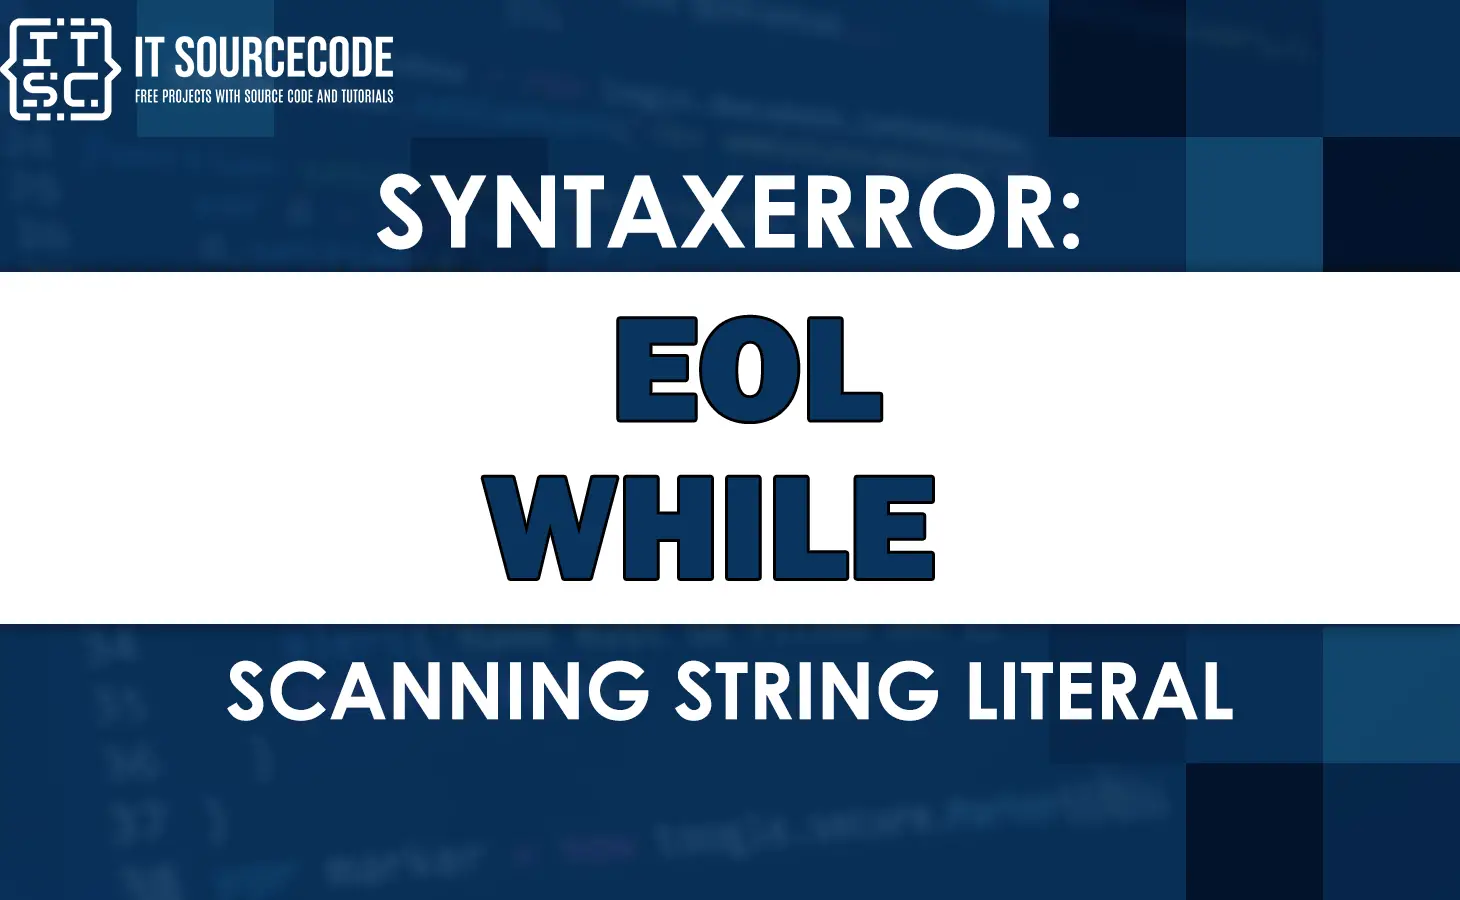 Syntaxerror: eol while scanning string literal